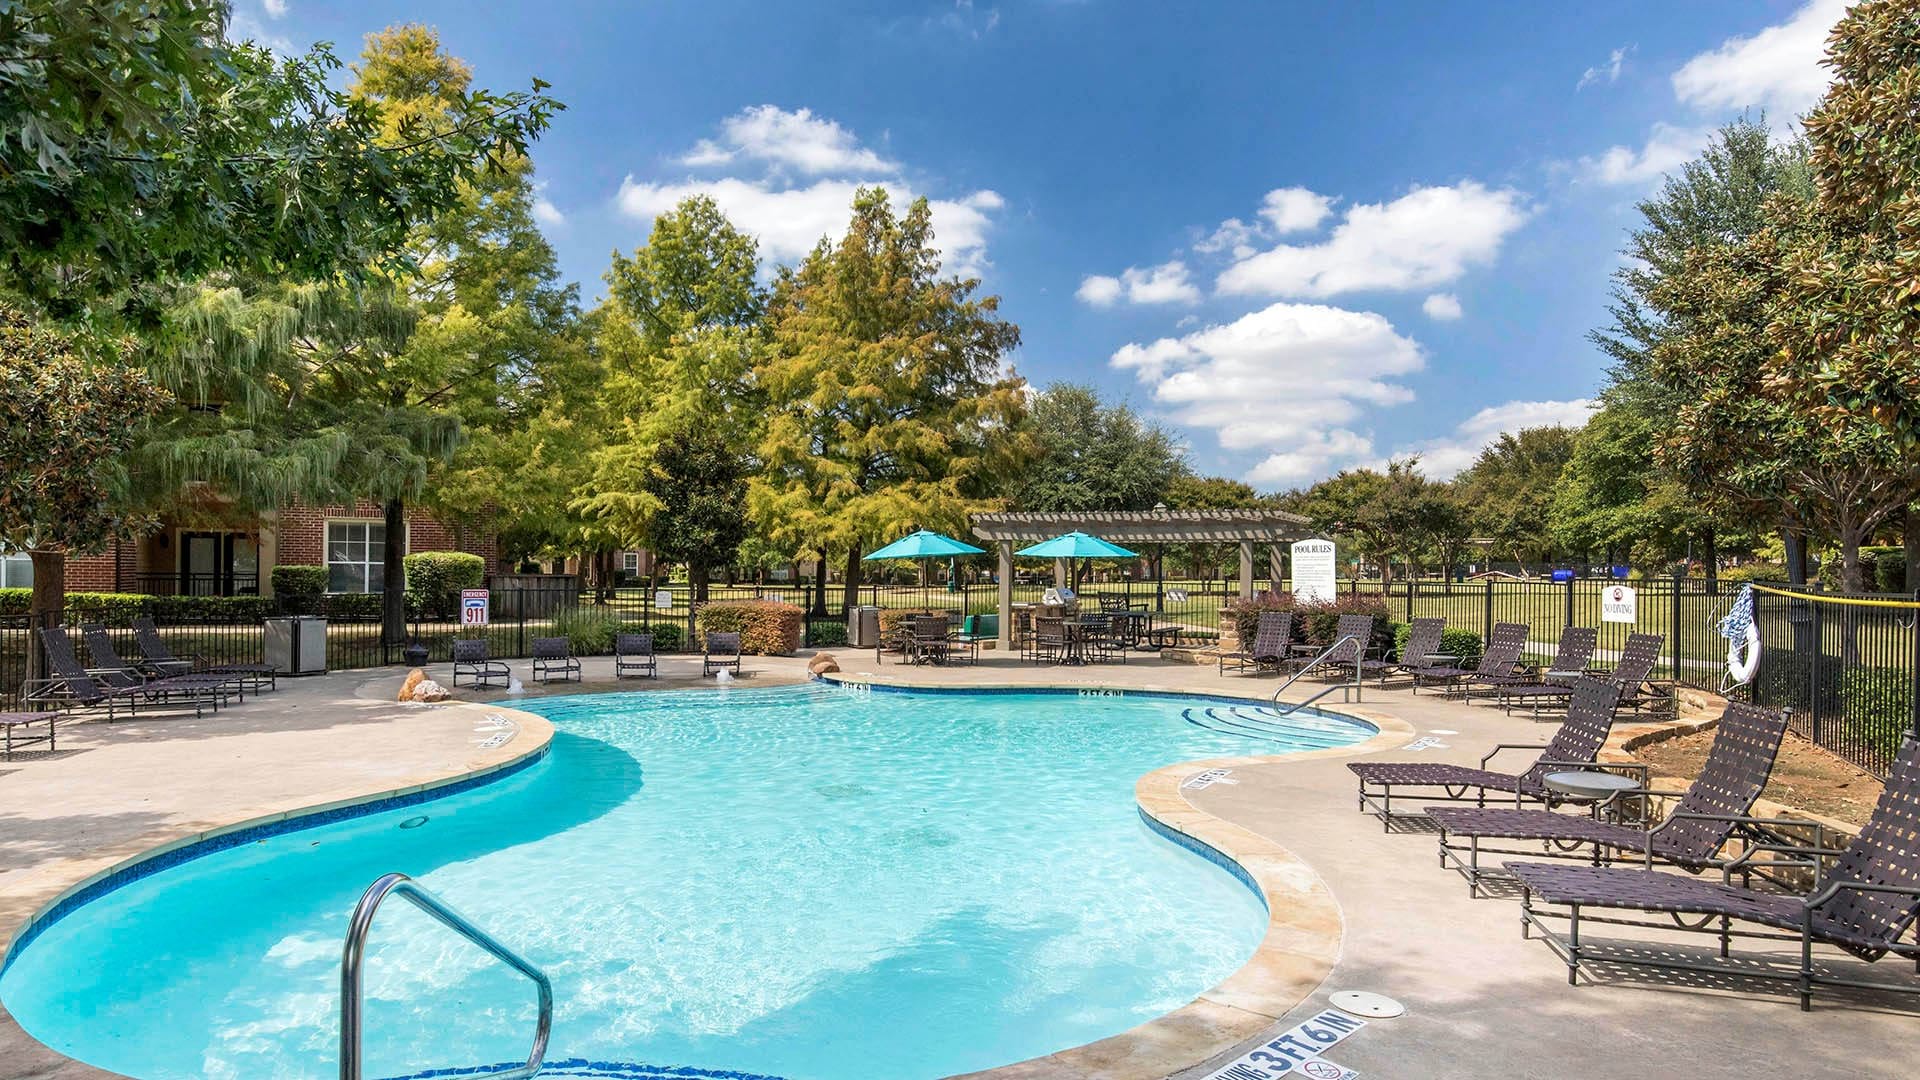 Resort-Style Swimming Pool with Lounge Chairs at Our Apartments near Plano, TX